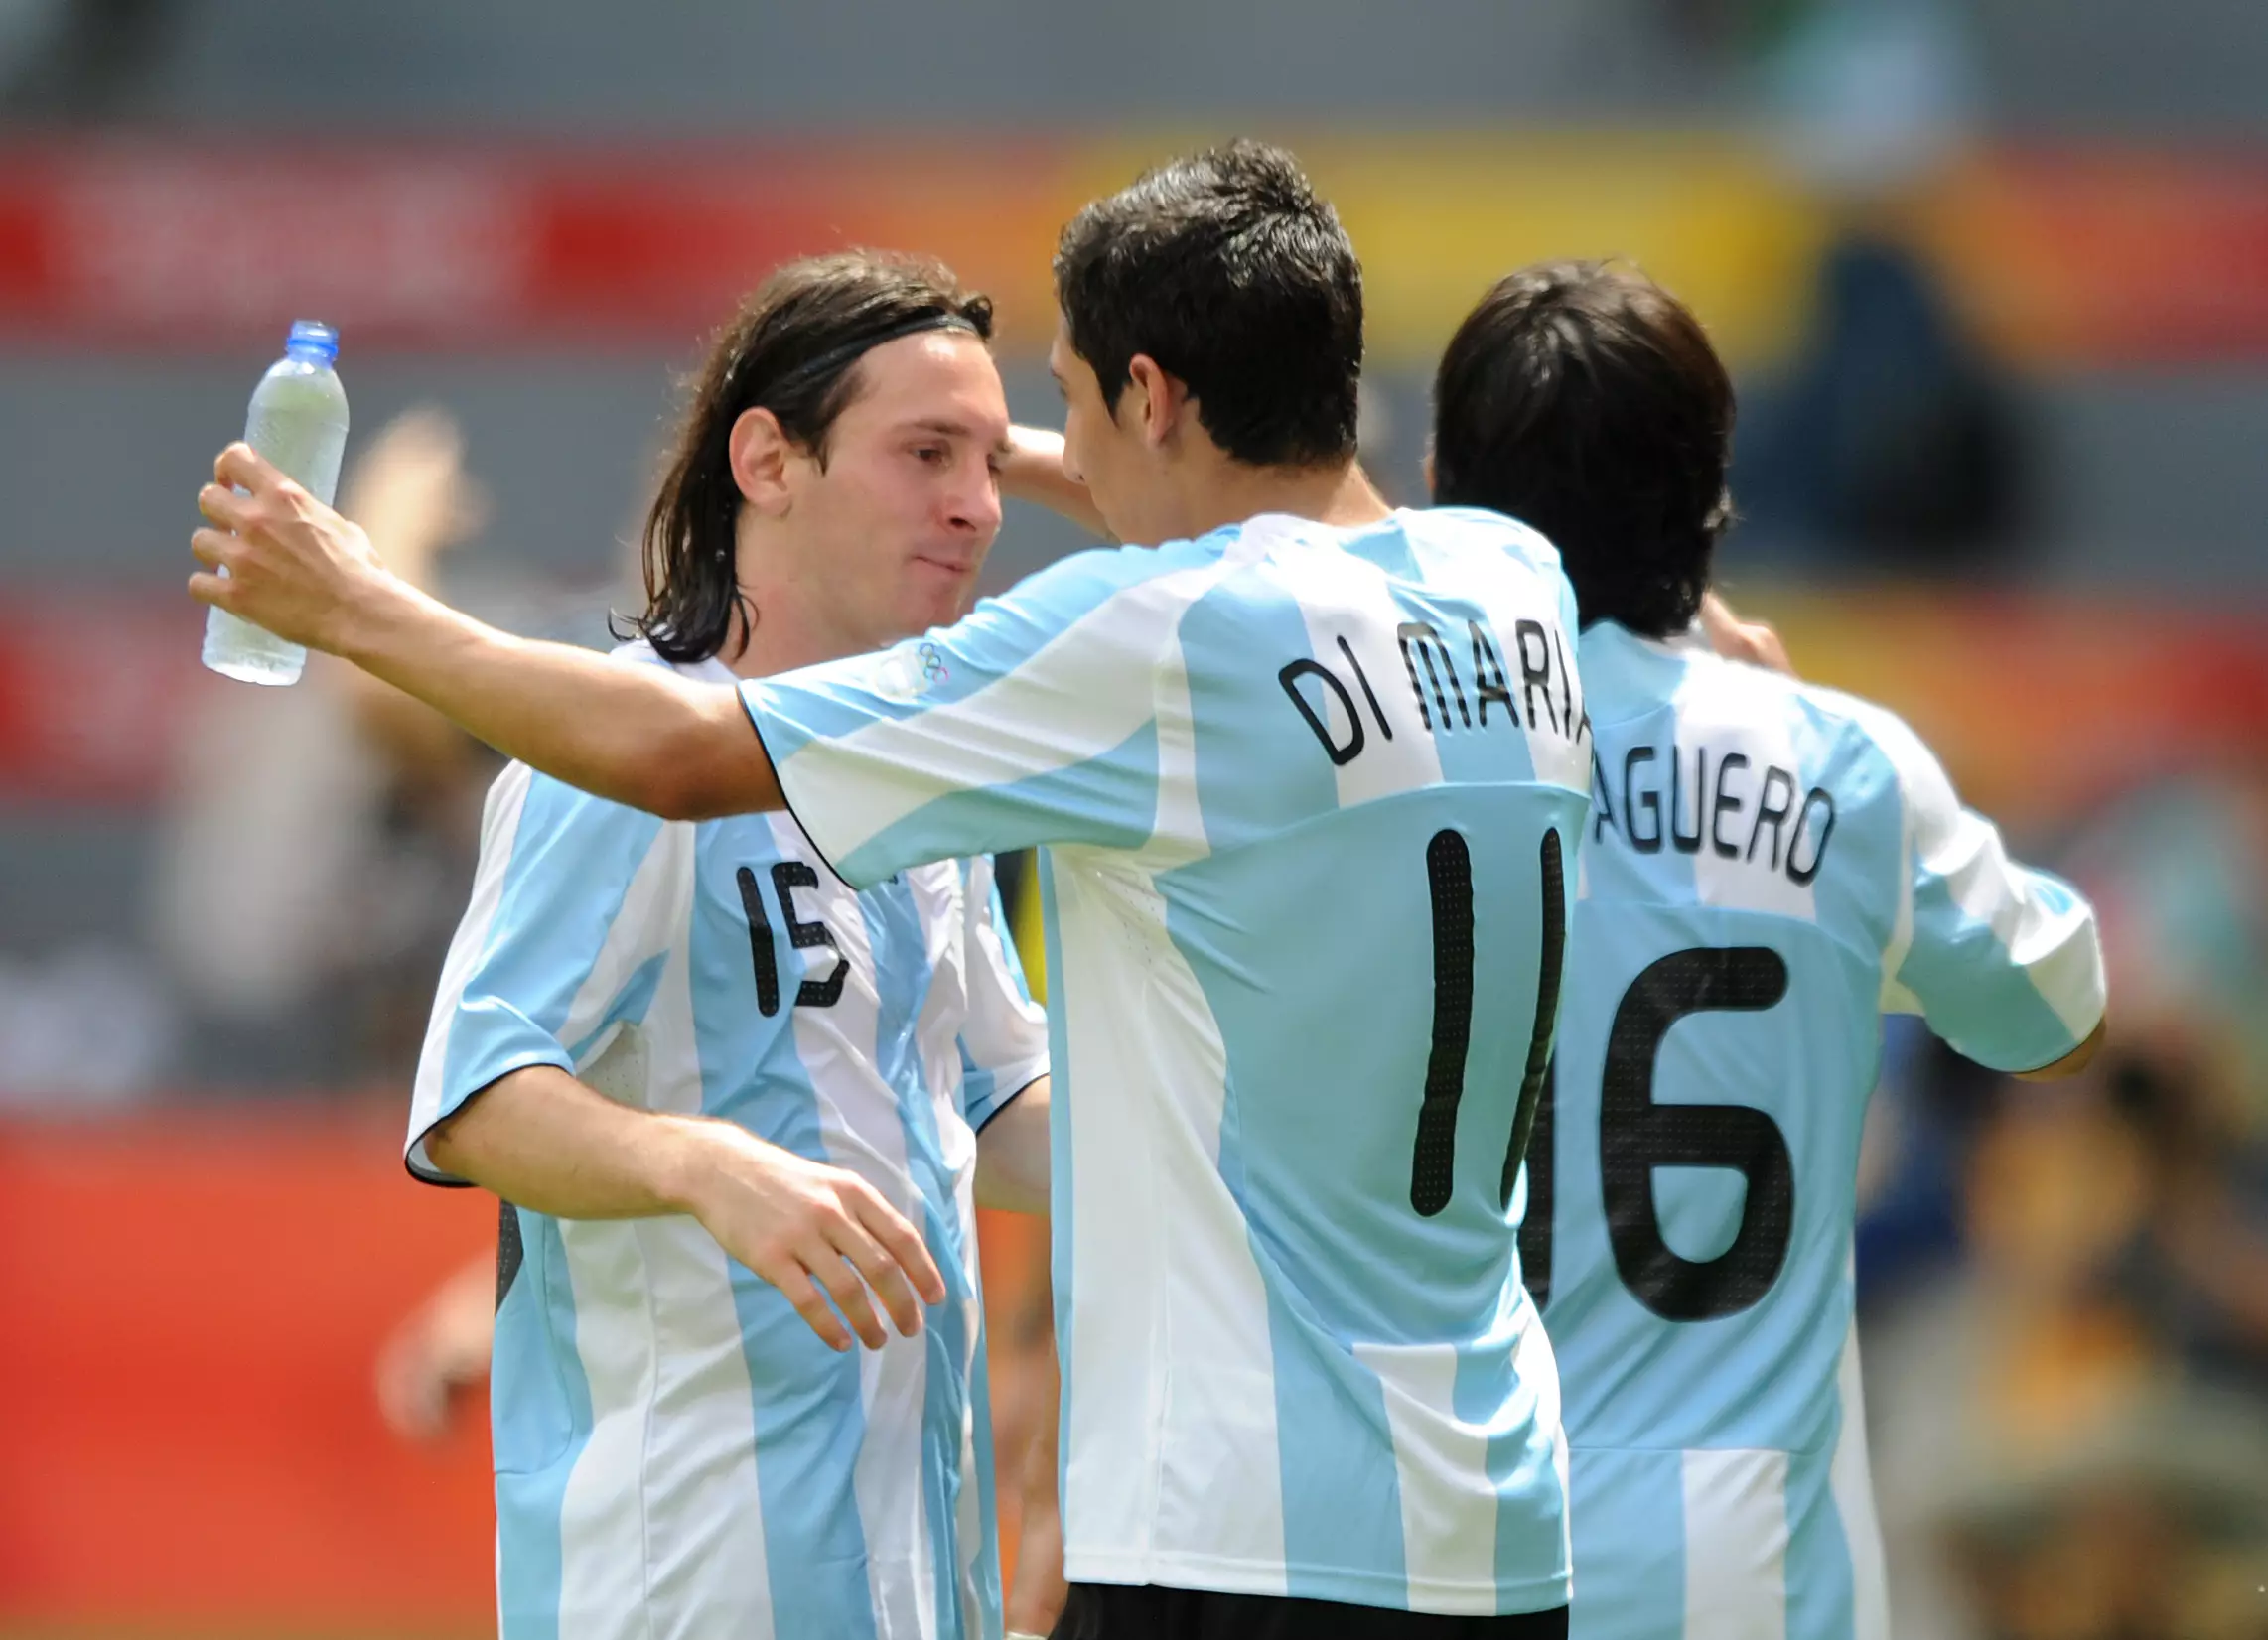 Messi and Di Maria playing together for Argentina. Image: PA Images